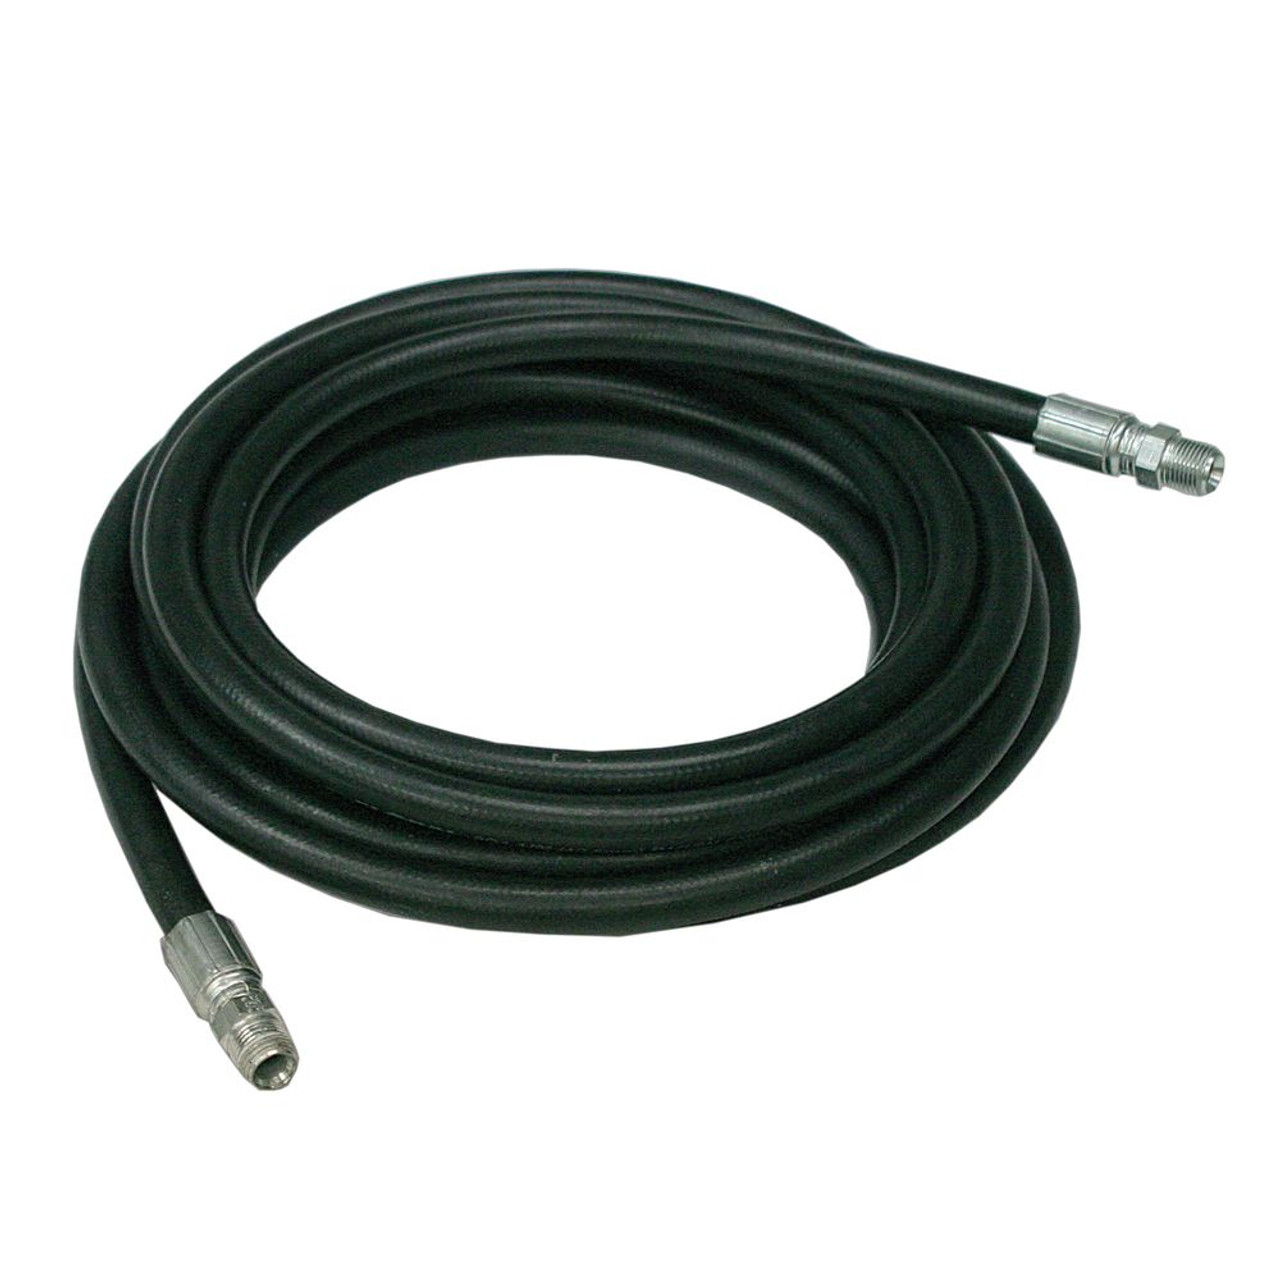 Reelcraft S25-260044 - 3/8 x 25 ft. High Pressure Grease Hose